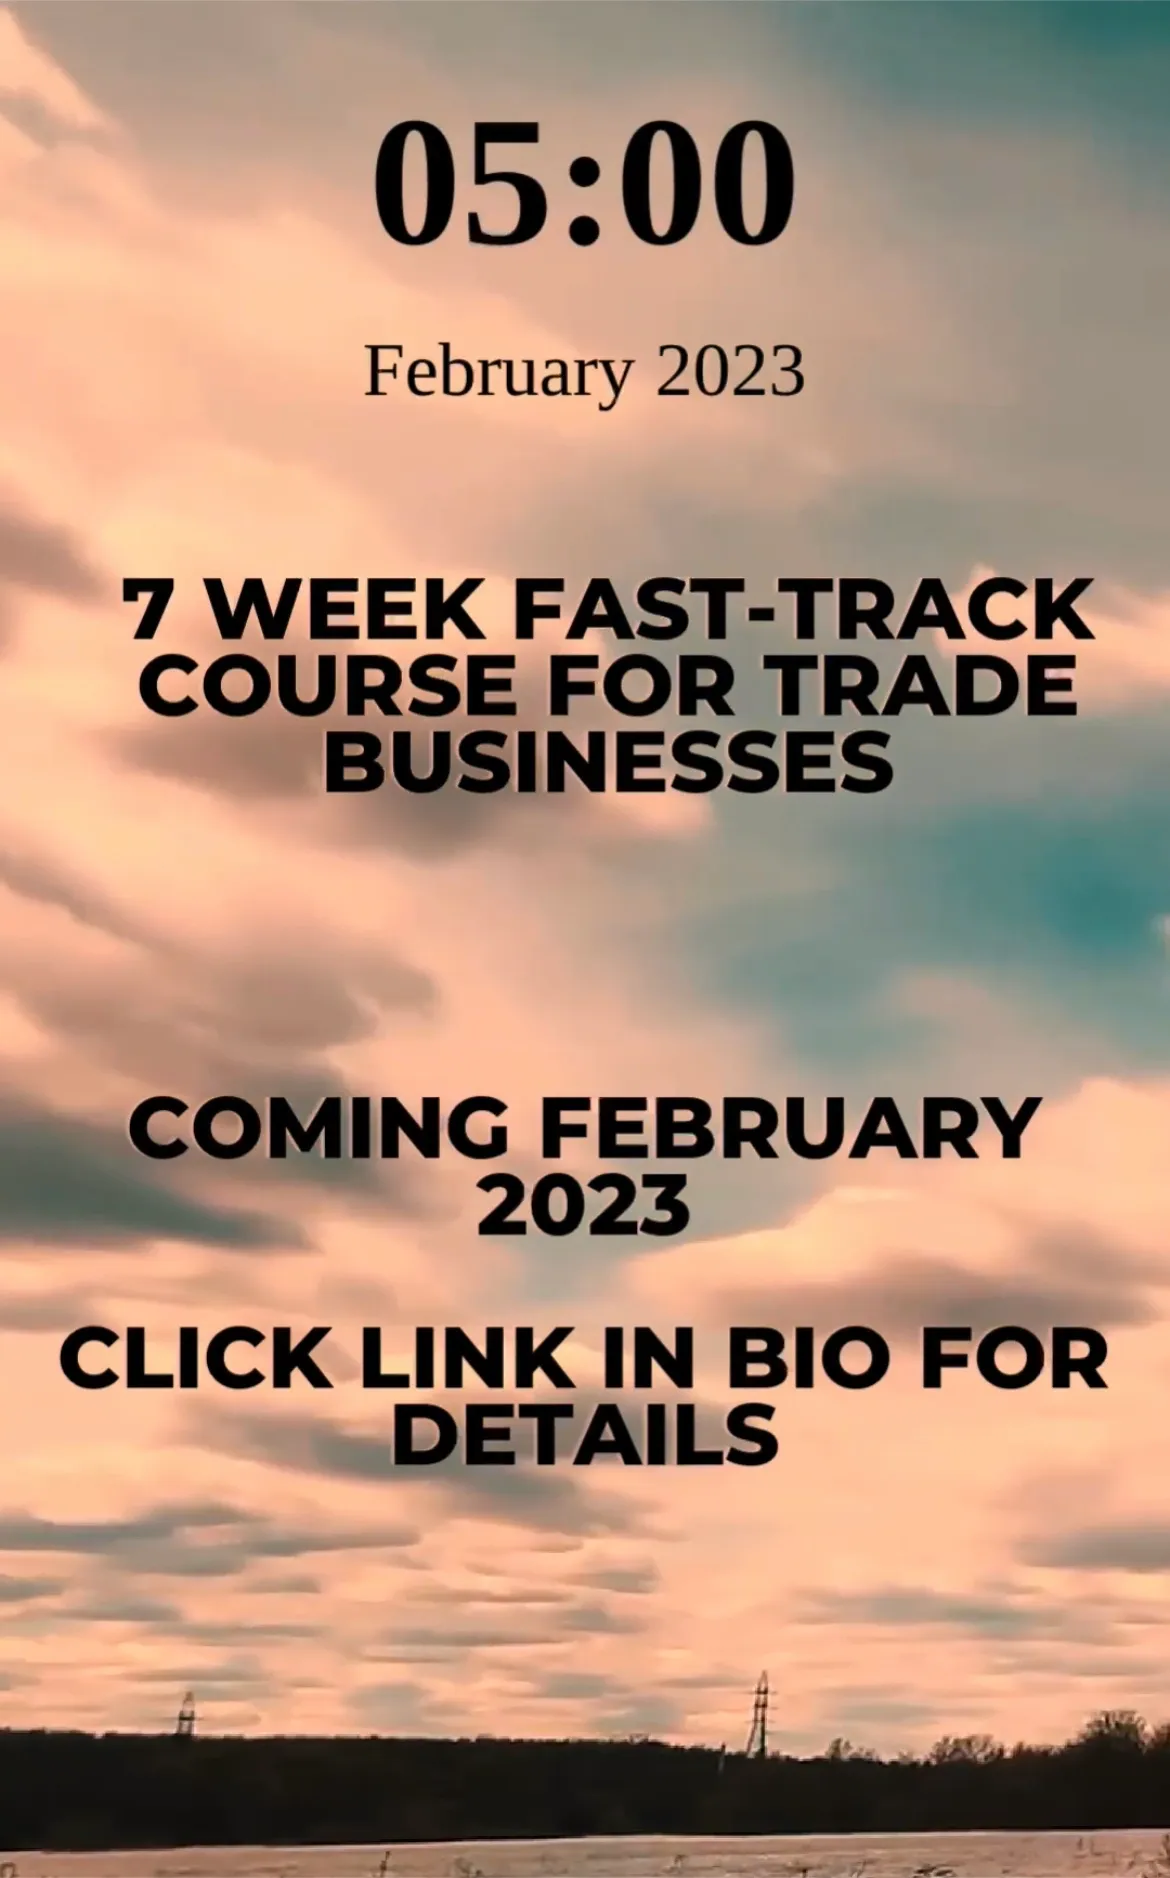 7 Weeks Fast-track course to Automate & Grow your trade business